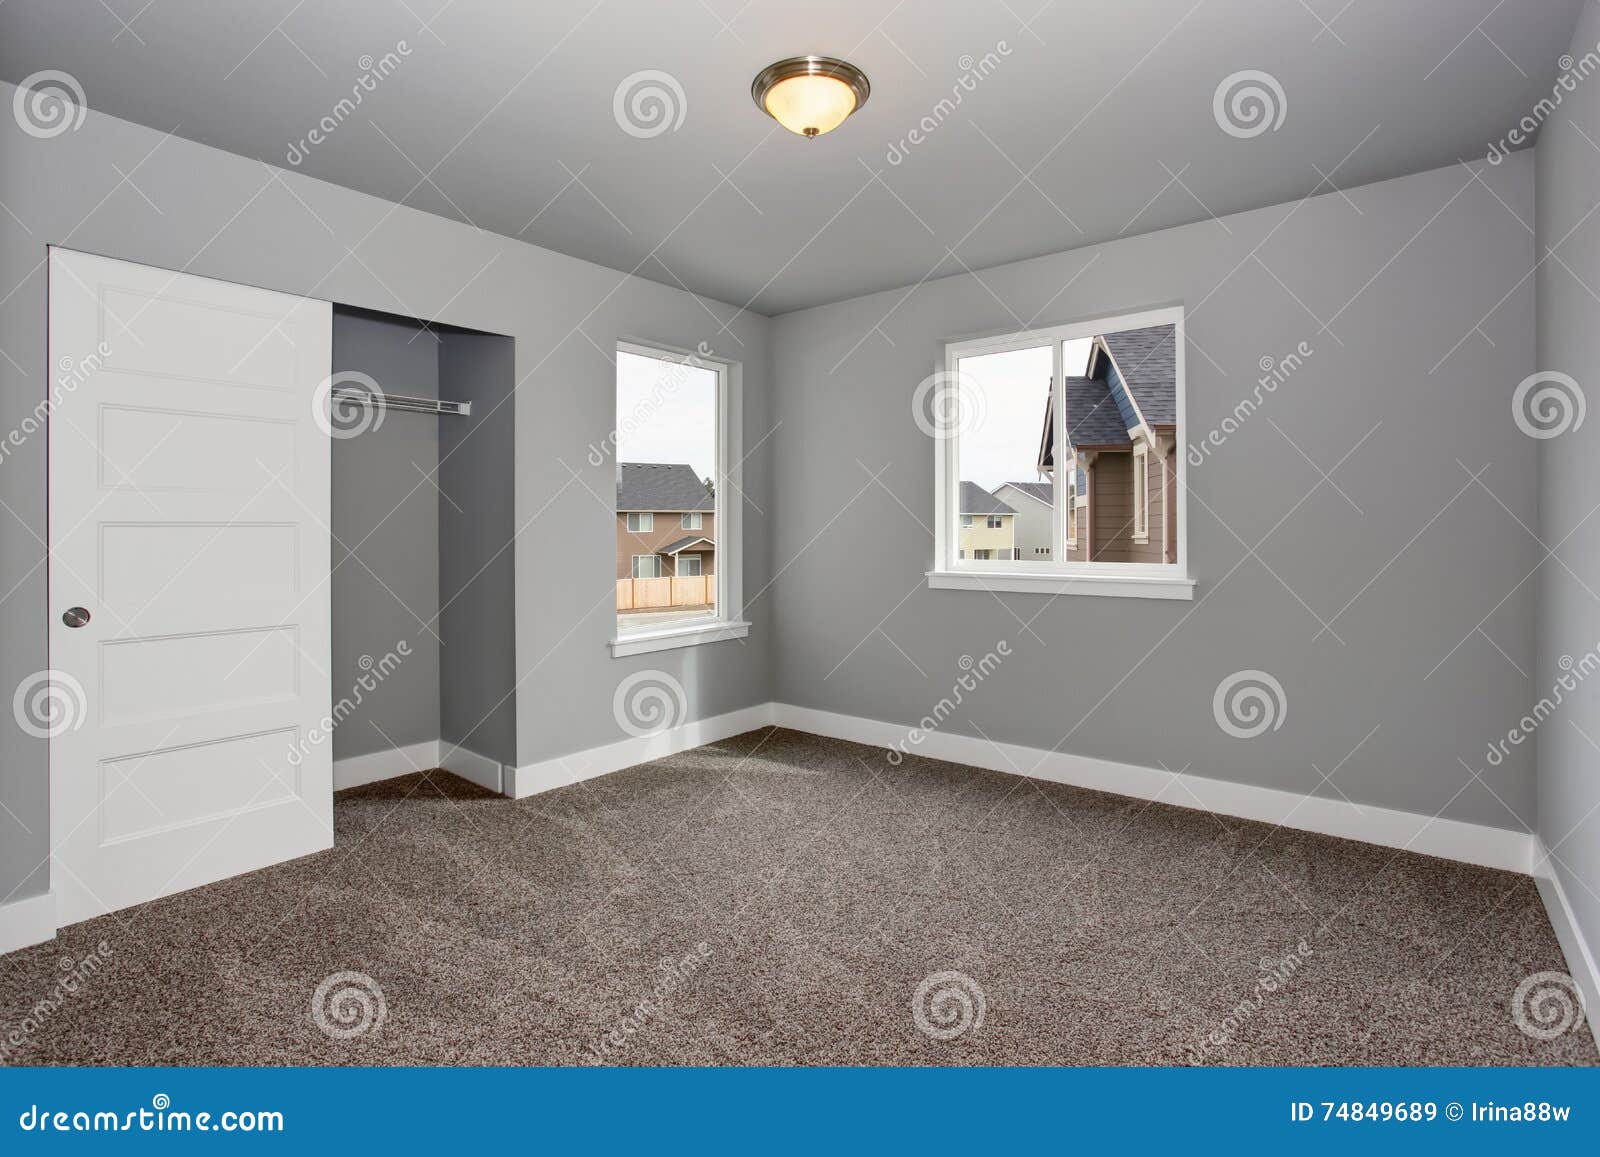 Small Basement Room Interior With Grey Walls And White Trim Stock